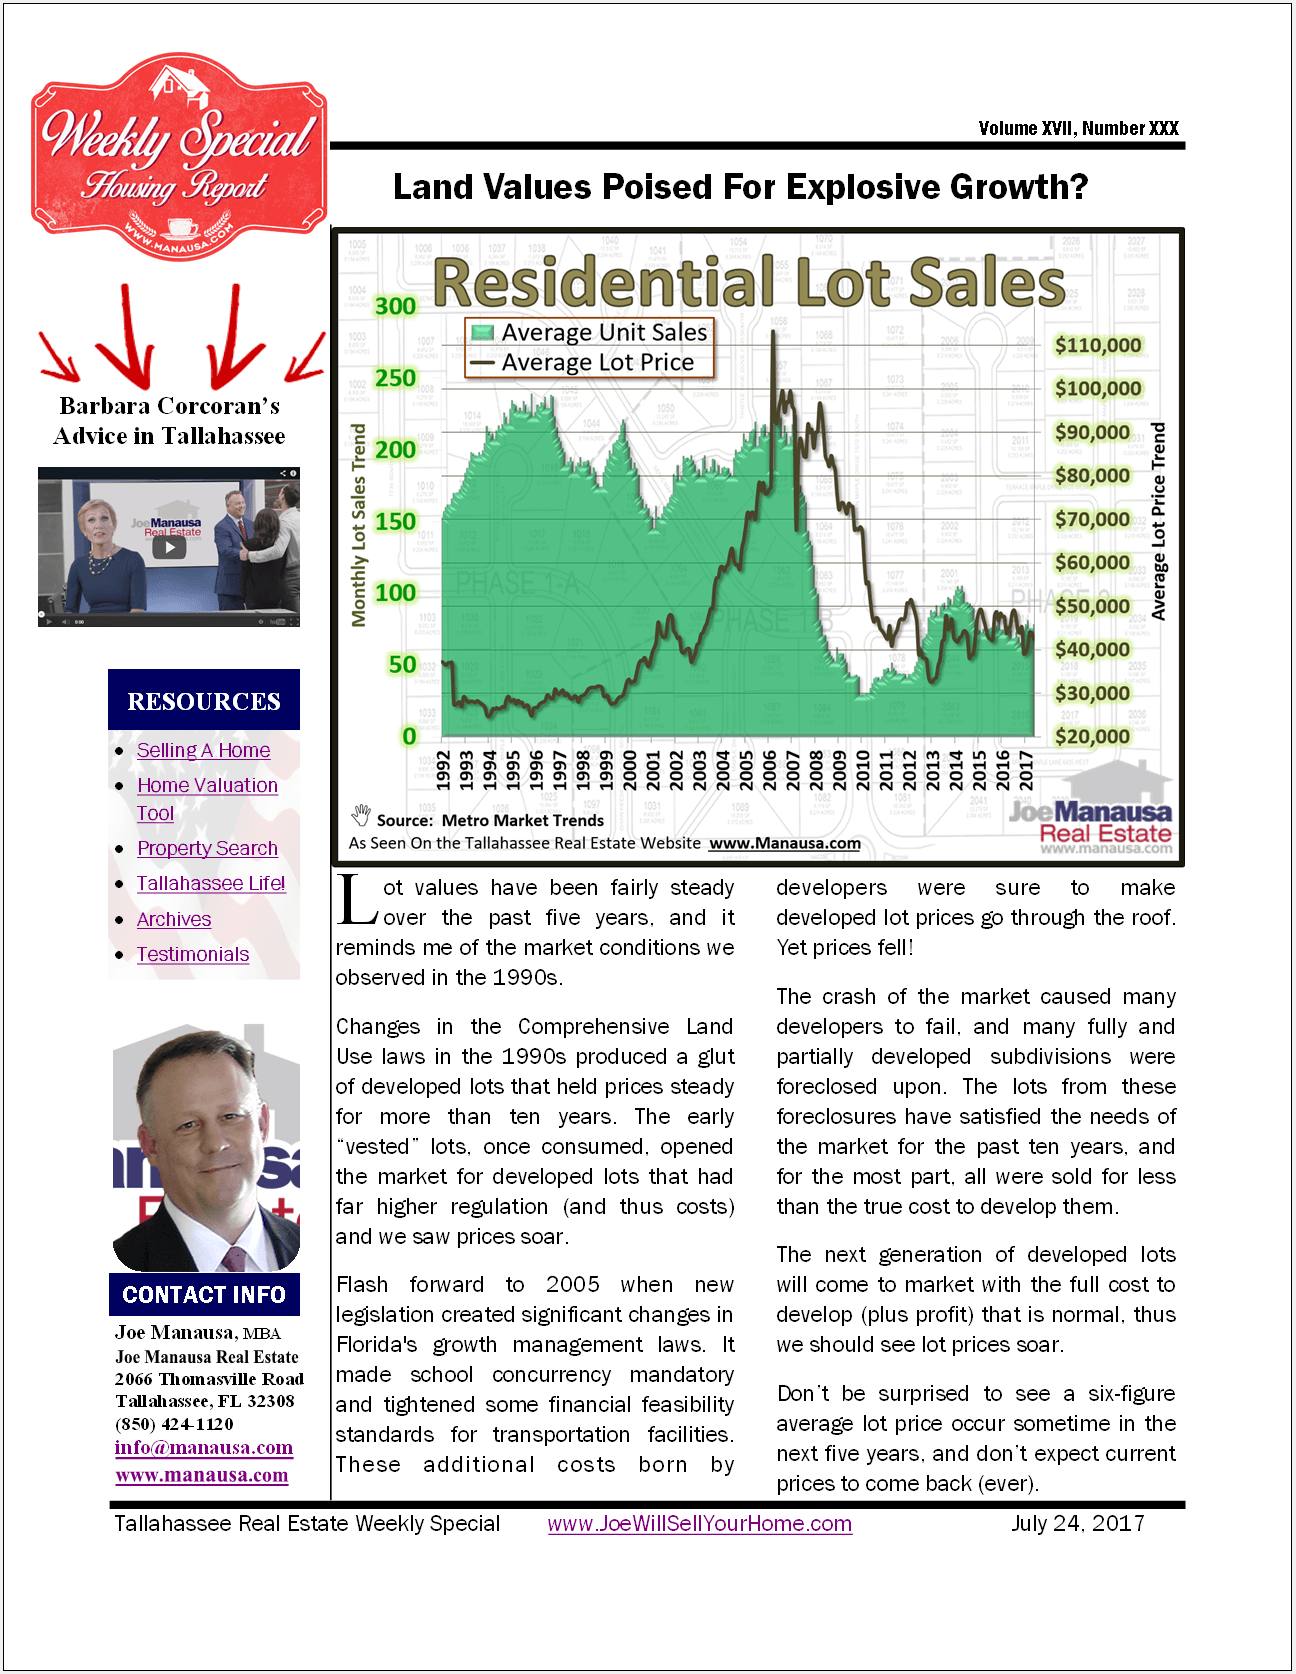 Lot Prices Are Poised For Explosive Growth